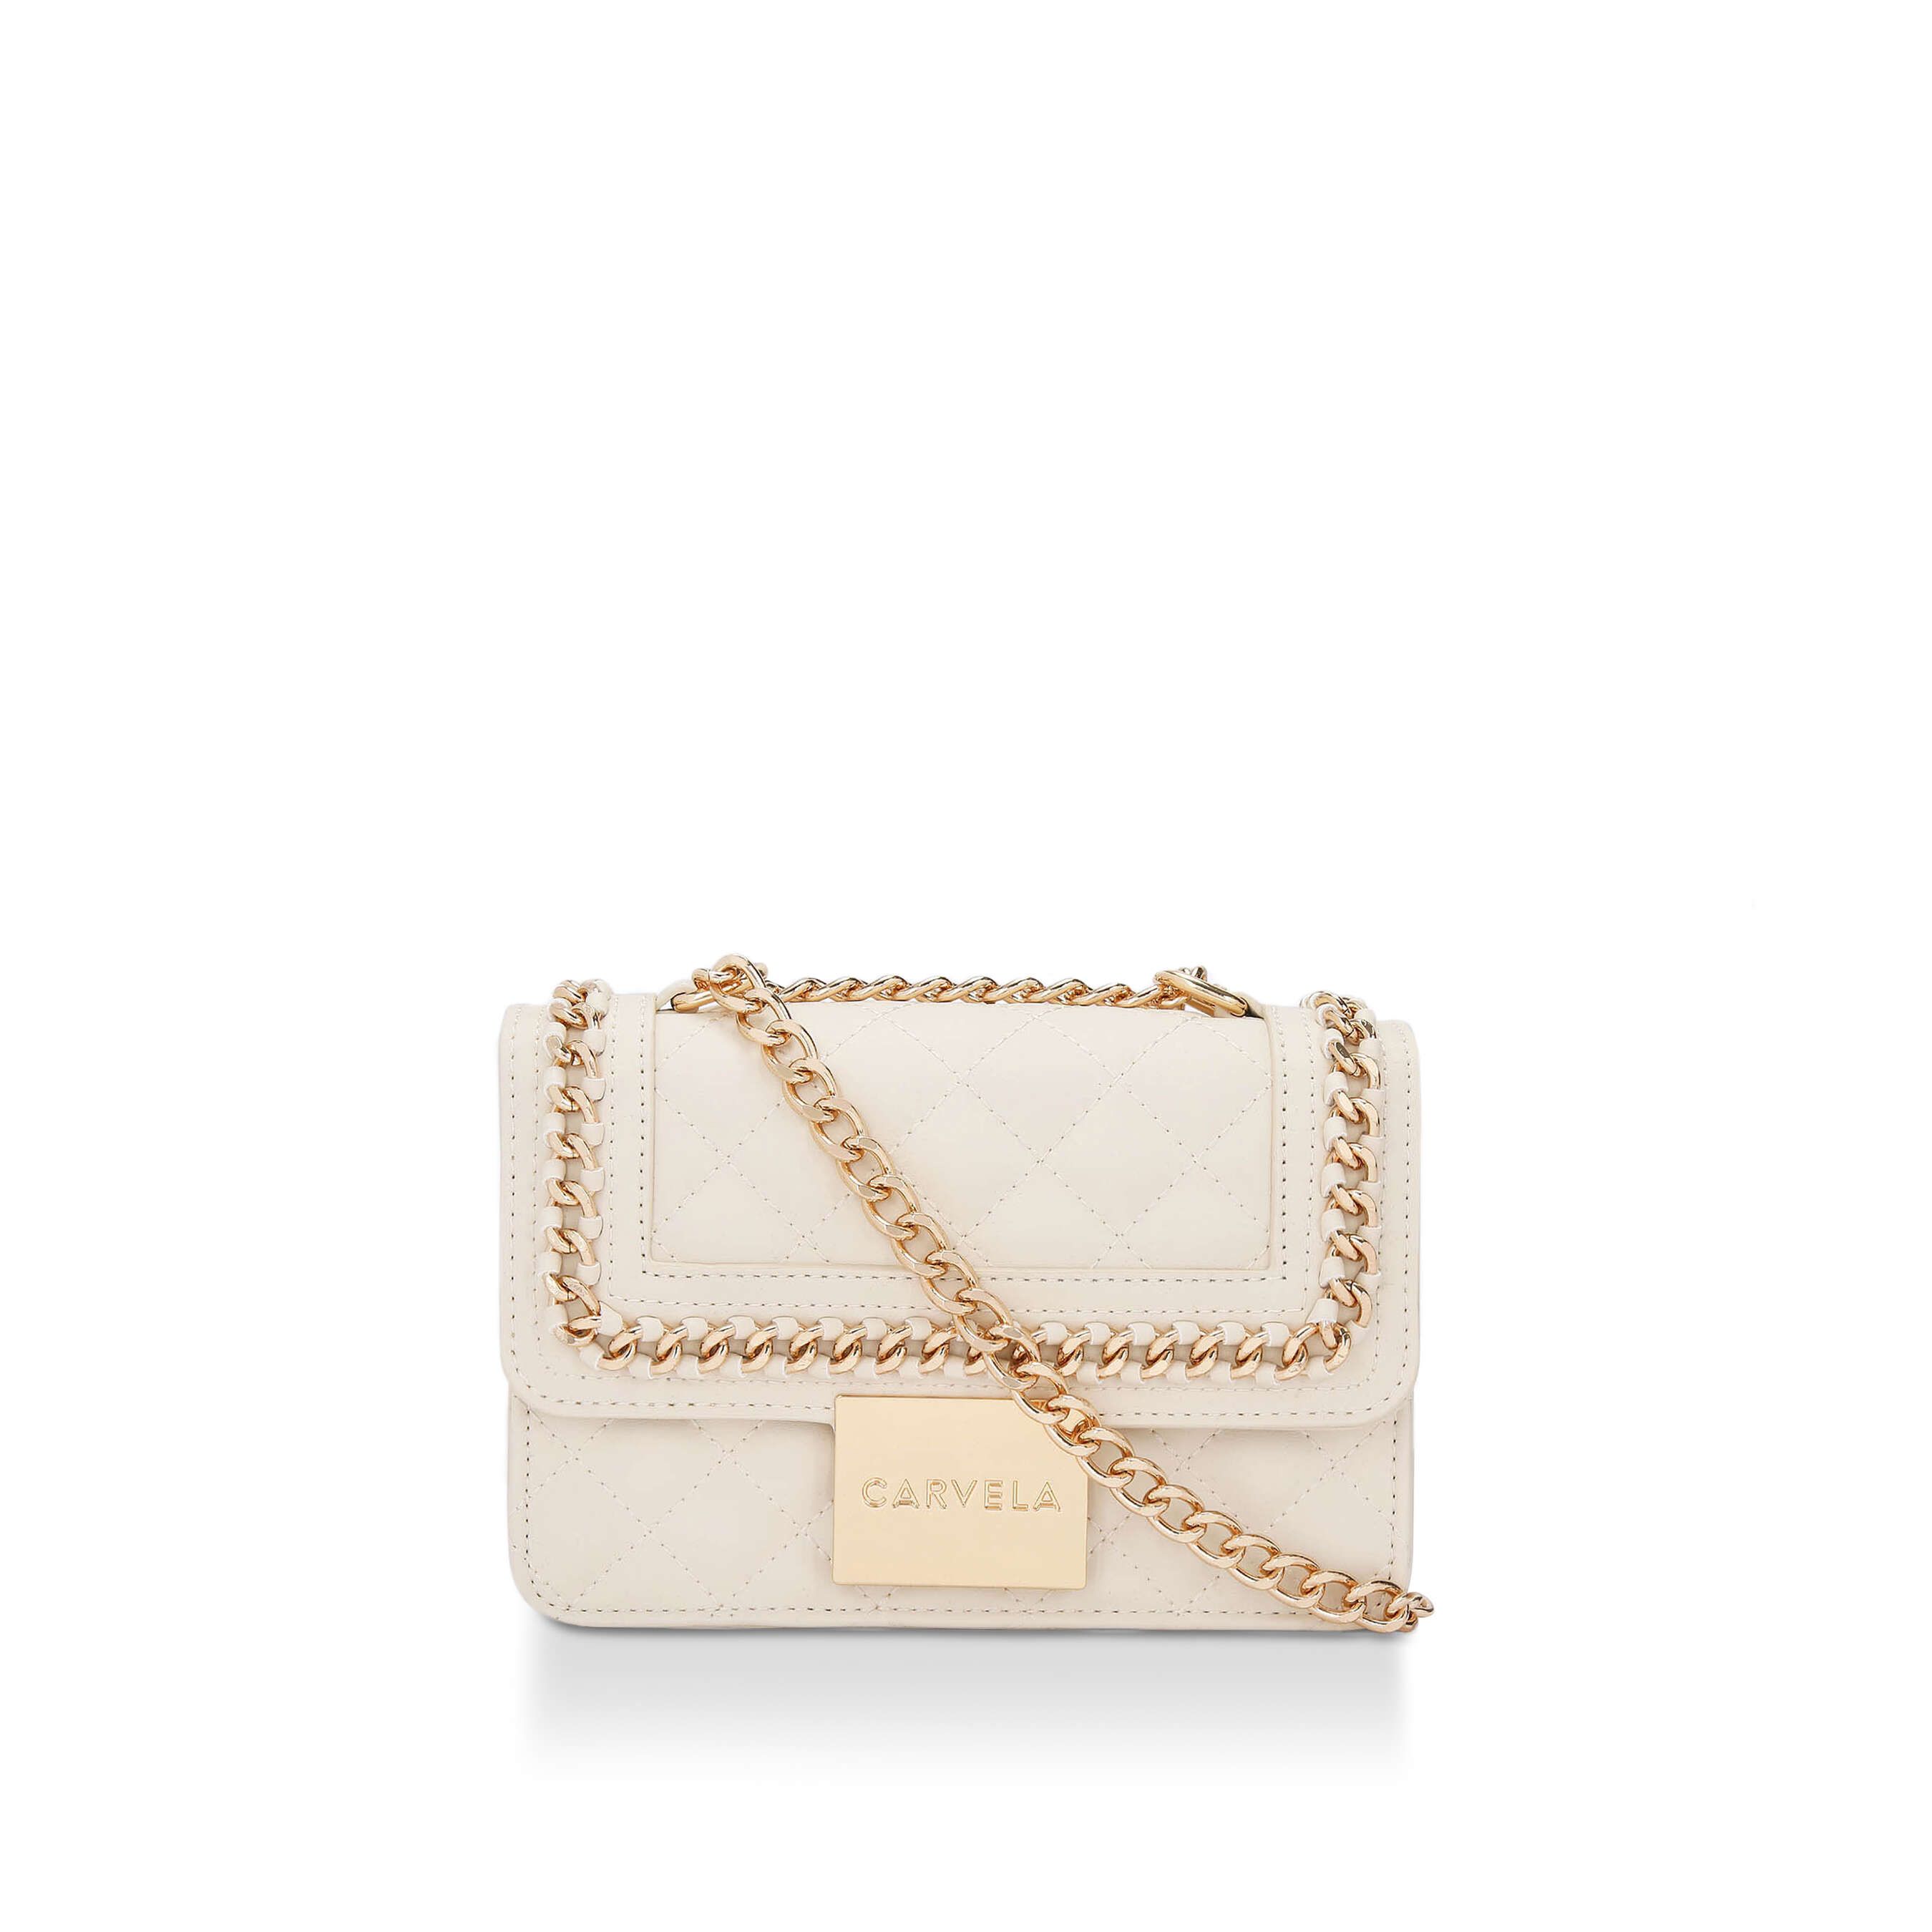 The Mini Bailey Cross Body is crafted in a bone leather alternative with overstitch quilted flap detail. There is a gold tone chain trim as well as gold tone branded plate closure. Dimensions: 13cm (H), 21cm (L), 7cm (D). Strap length: 116cm Strap drop: 59cm.